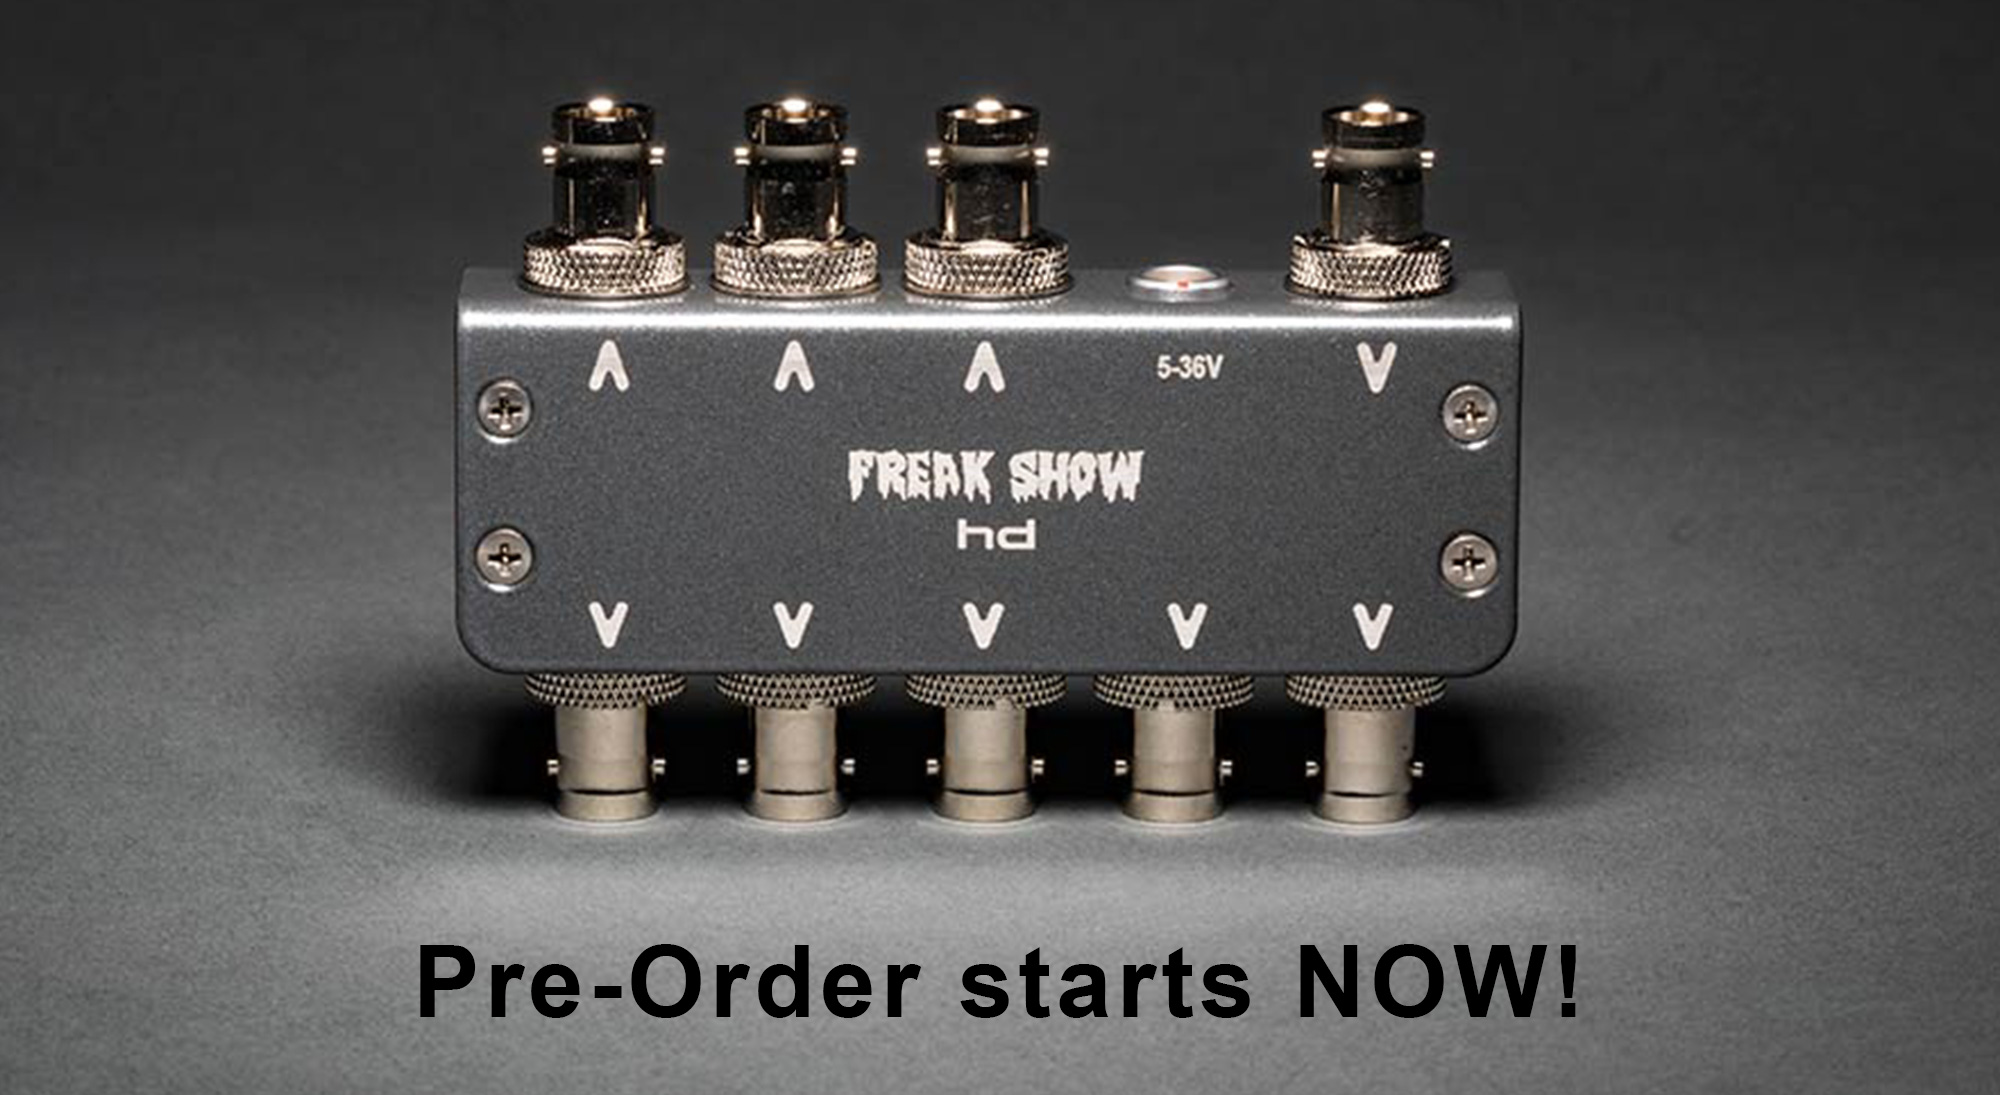 Angry Face adds Freakshow HD products to its arsenal!